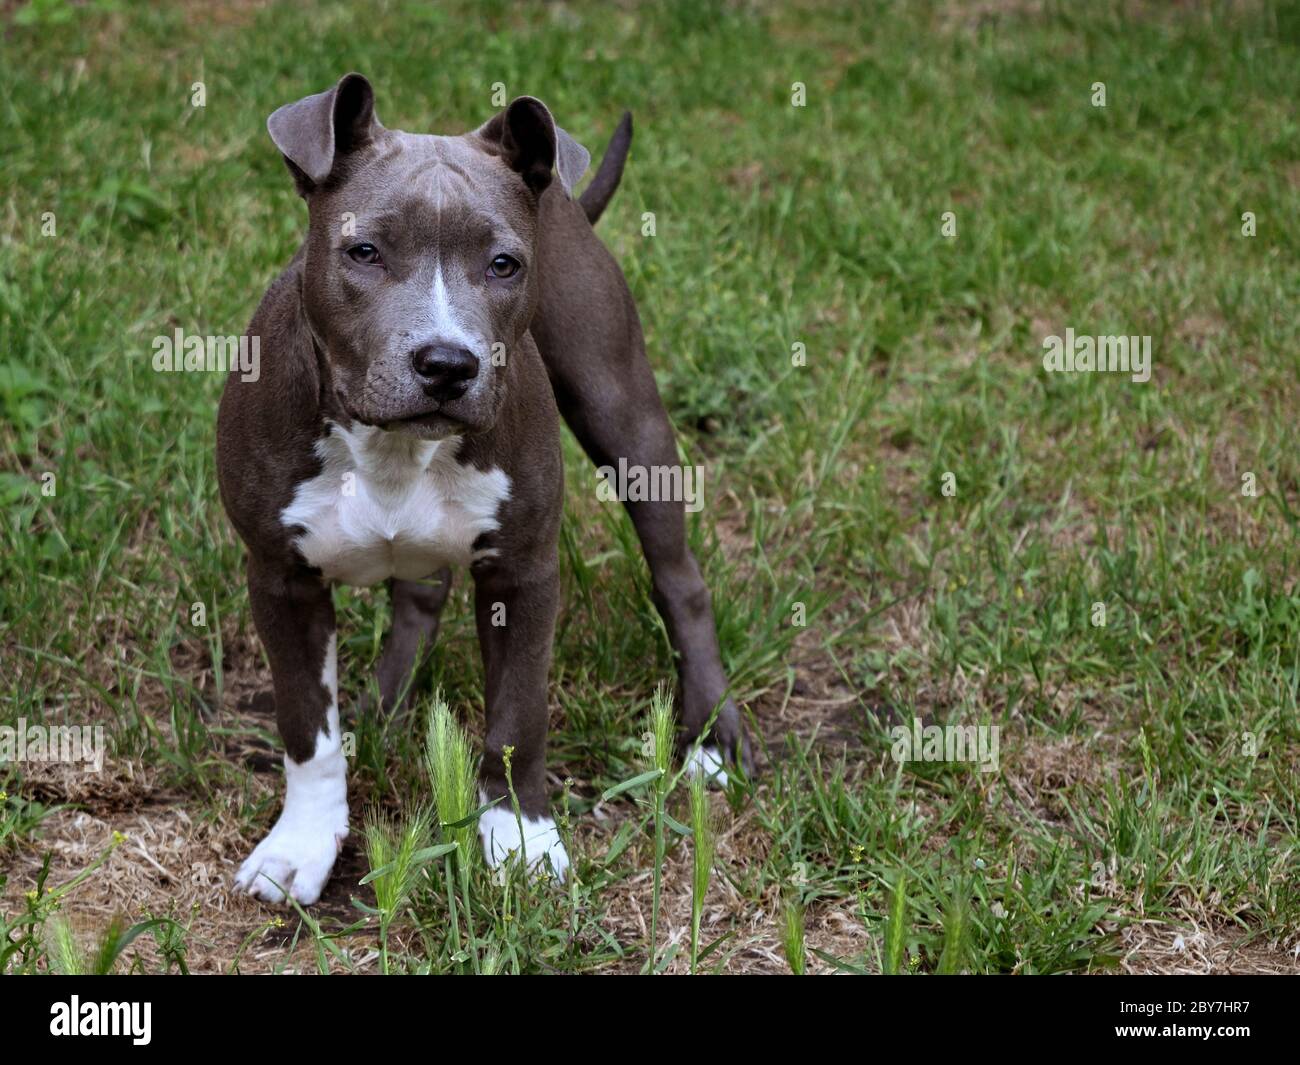 animal pet dog american staffordshire terrier amstaff pit-bull gray blue white Stock Photo